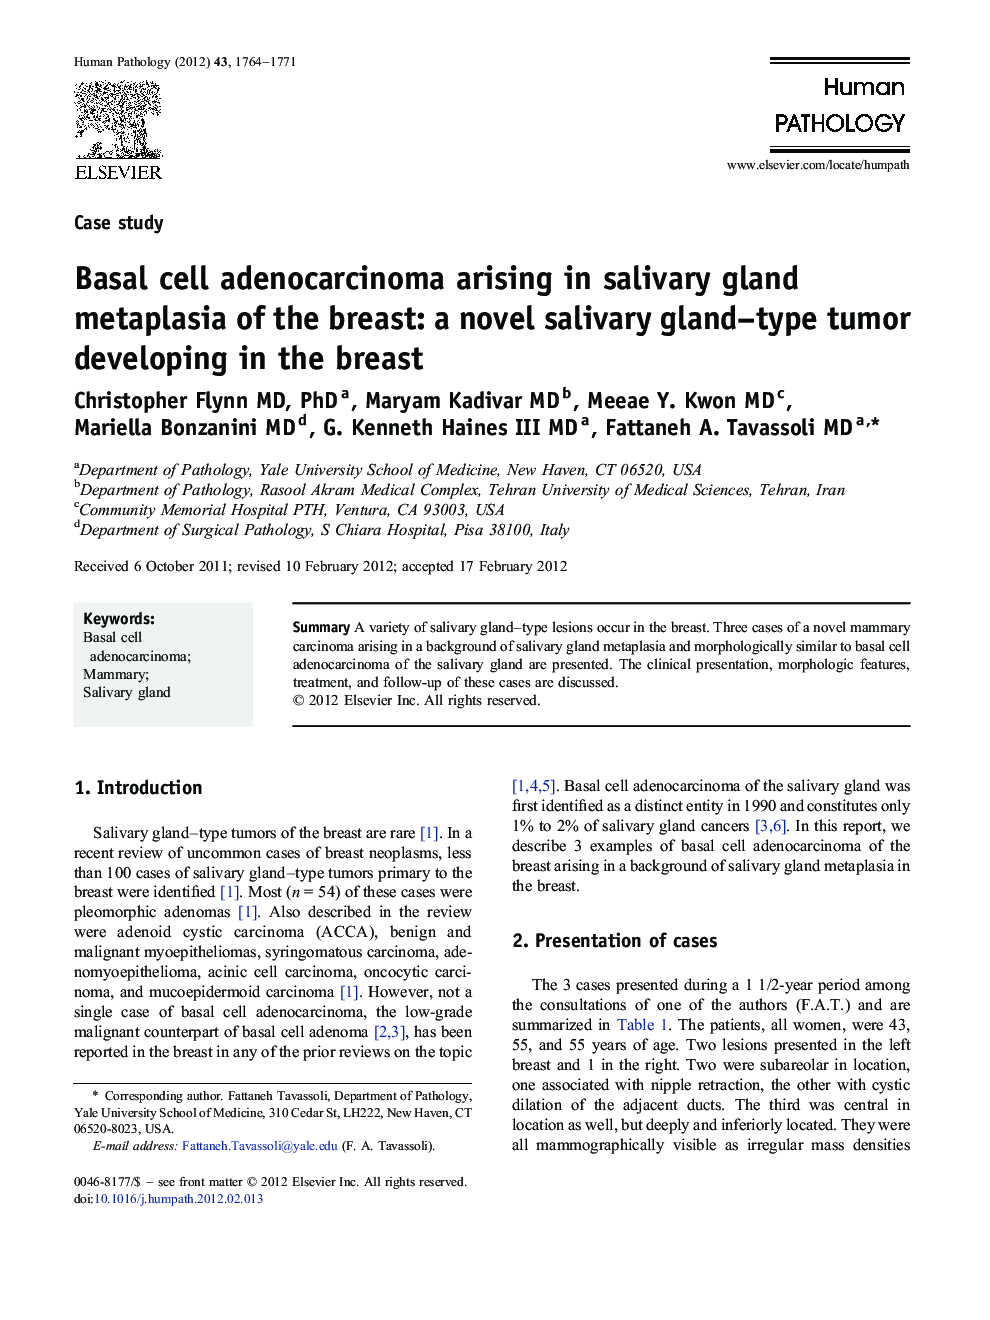 Basal cell adenocarcinoma arising in salivary gland metaplasia of the breast: a novel salivary gland–type tumor developing in the breast